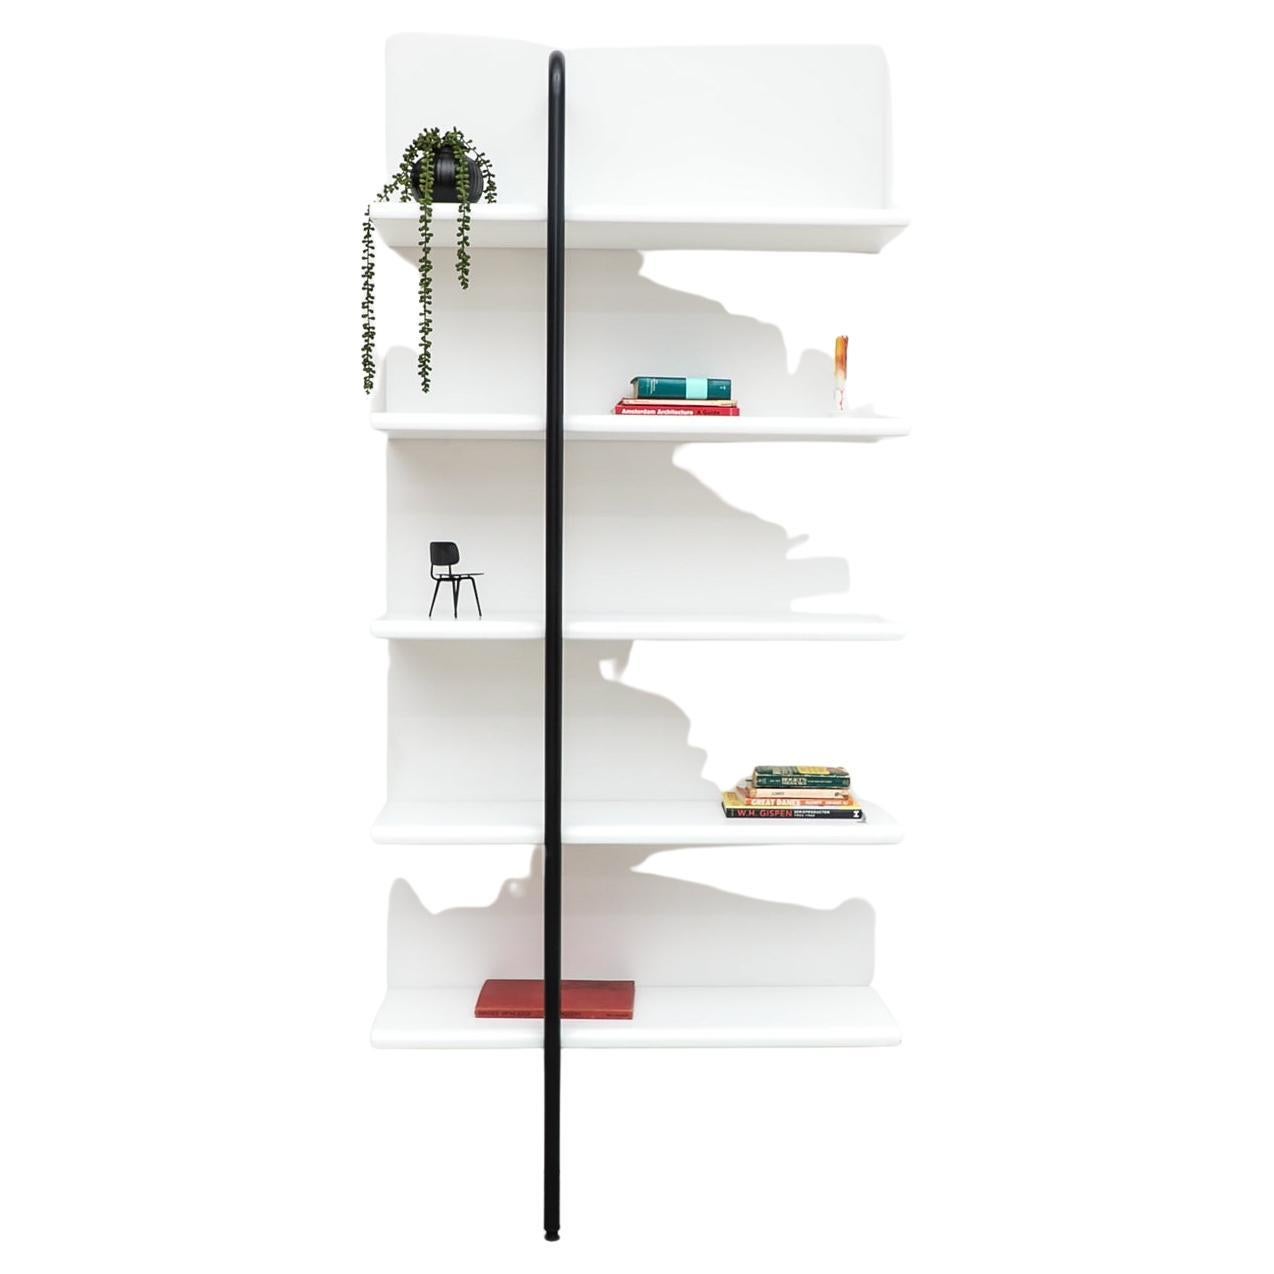 Modernist Sottsass style white shelving unit with adjustable black stability bar. In original condition with visible wear consistent with its age and use.